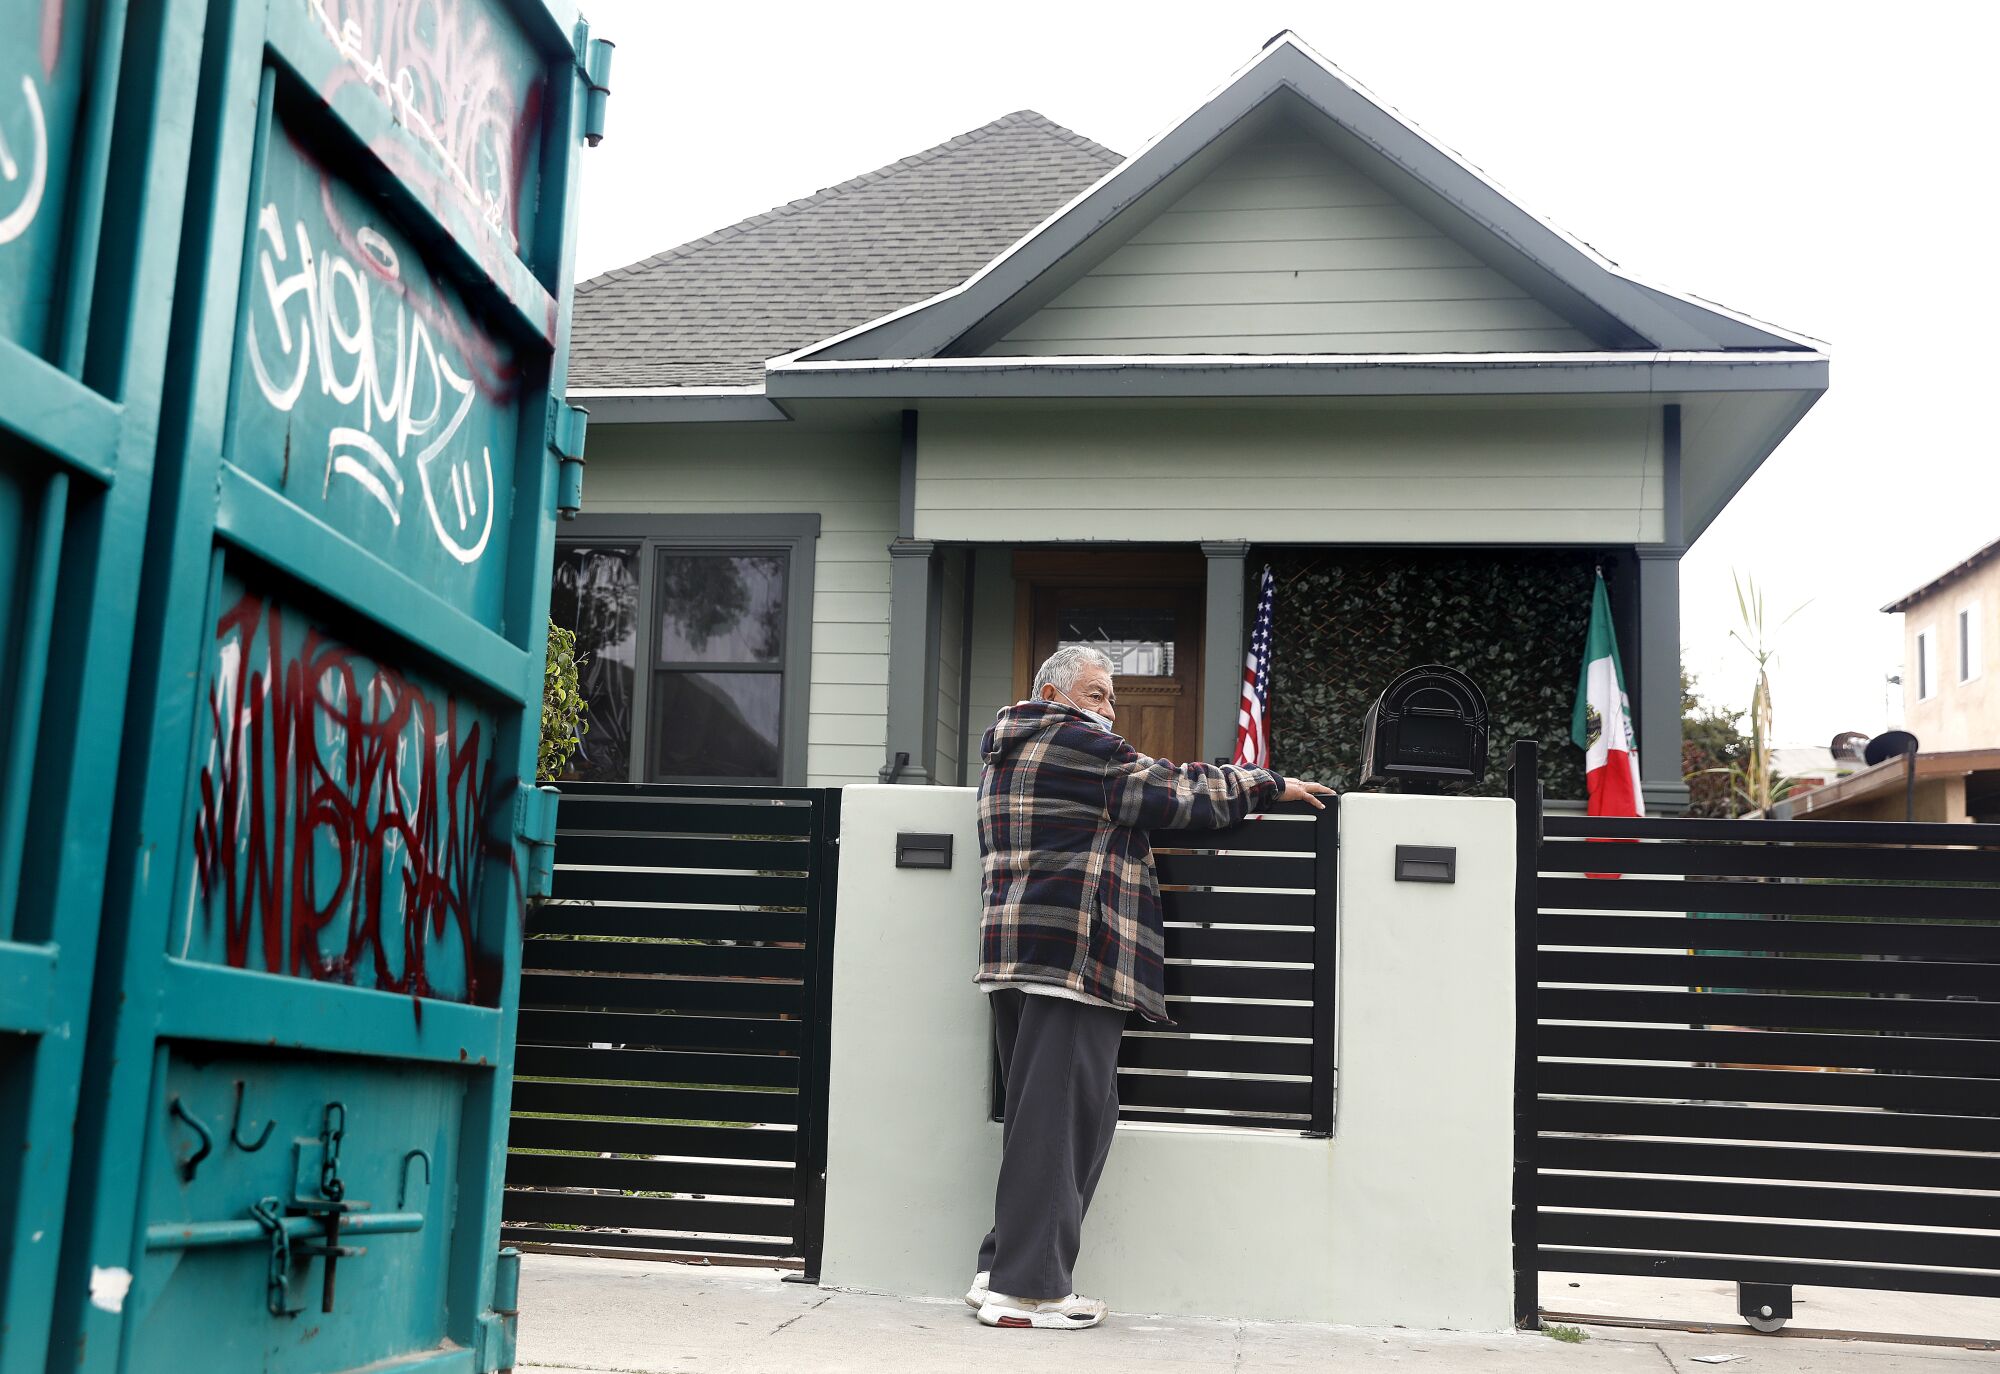 A man stands outside a house displaying U.S. and Mexican flags.